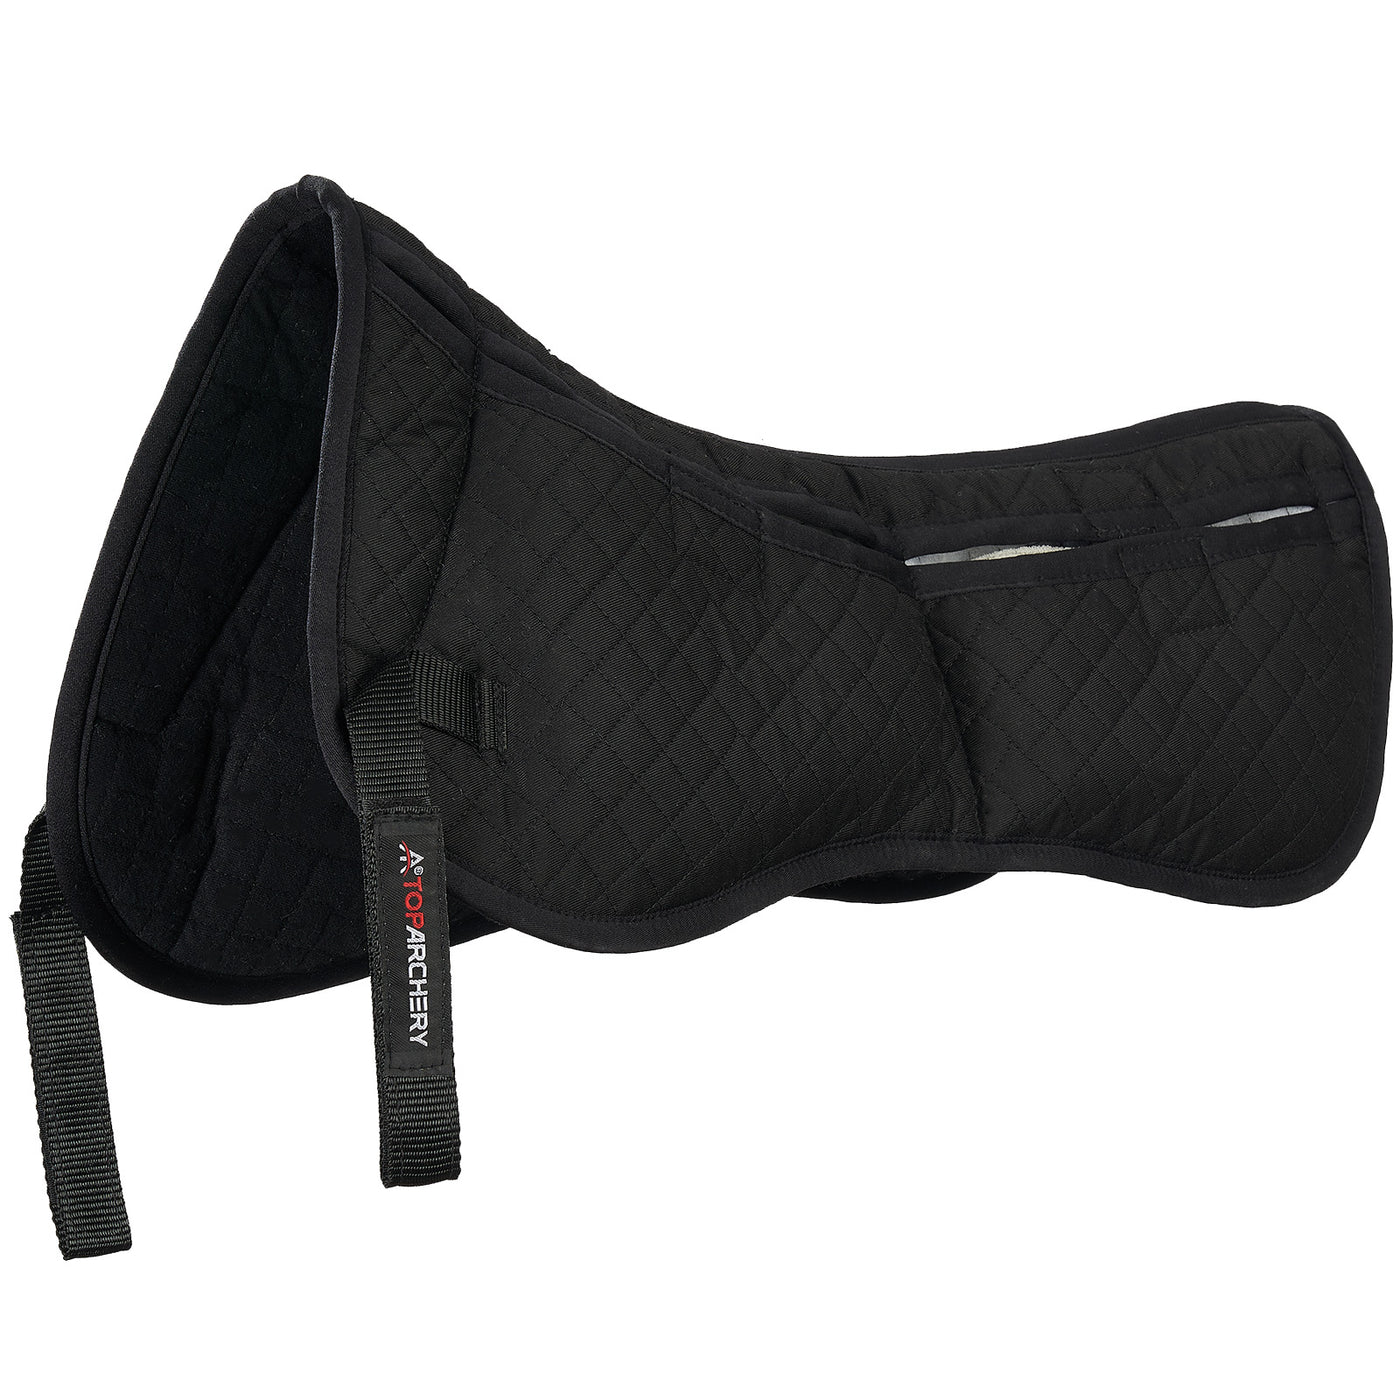 TopArchery Cotton Correction Horse Half Saddle Pad 4 Pocket with Adjustable Memory Foam Inserts